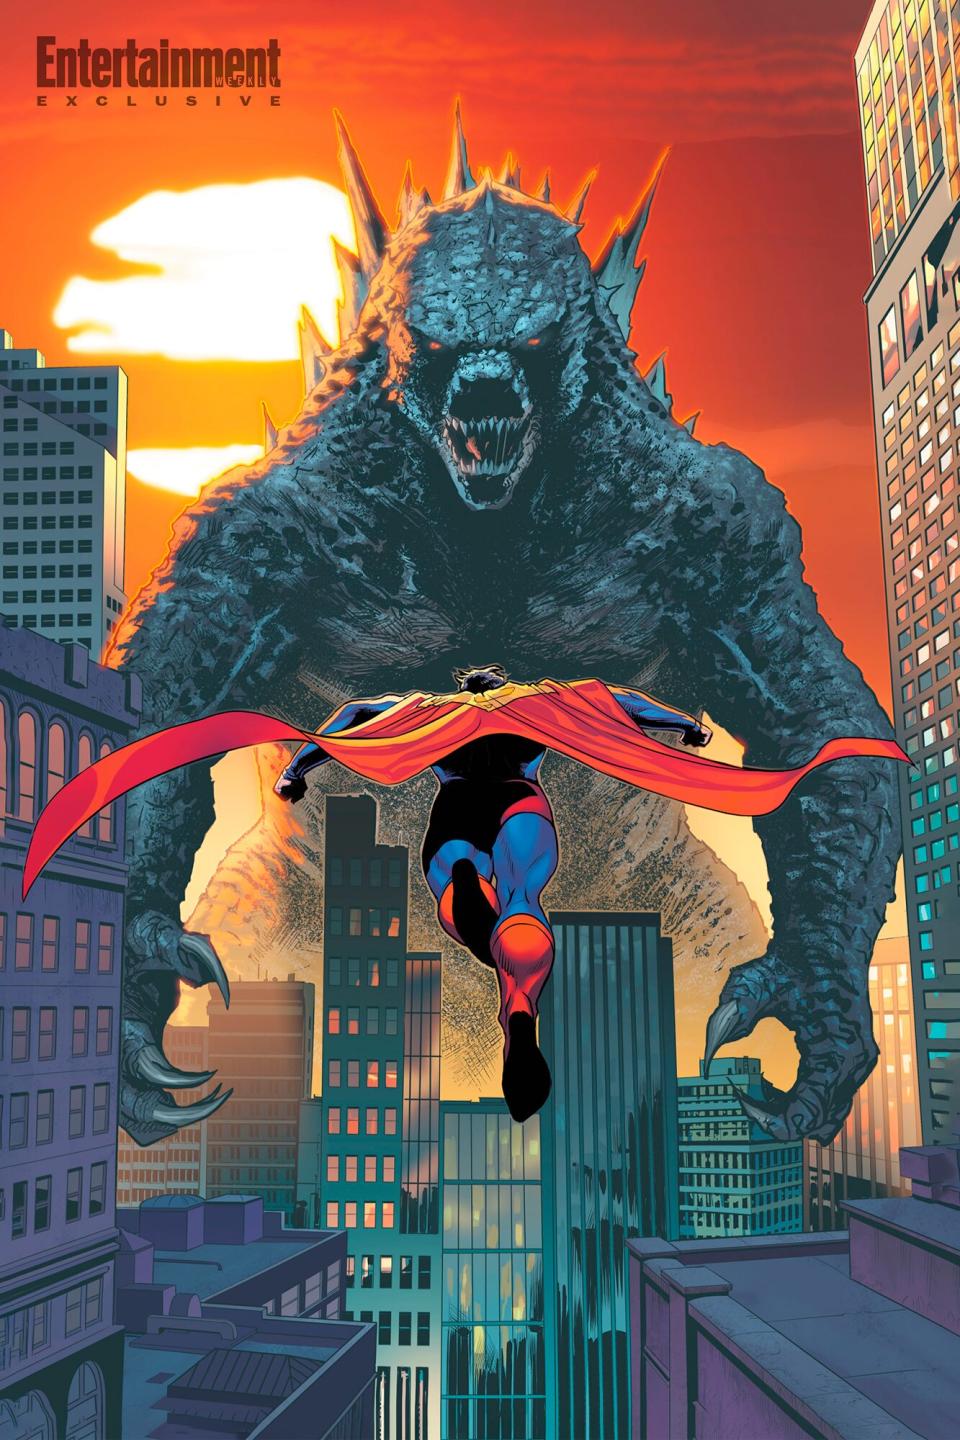 The Man of Steel faces the King of the Monsters in 'Justice League vs. Godzilla vs. Kong'